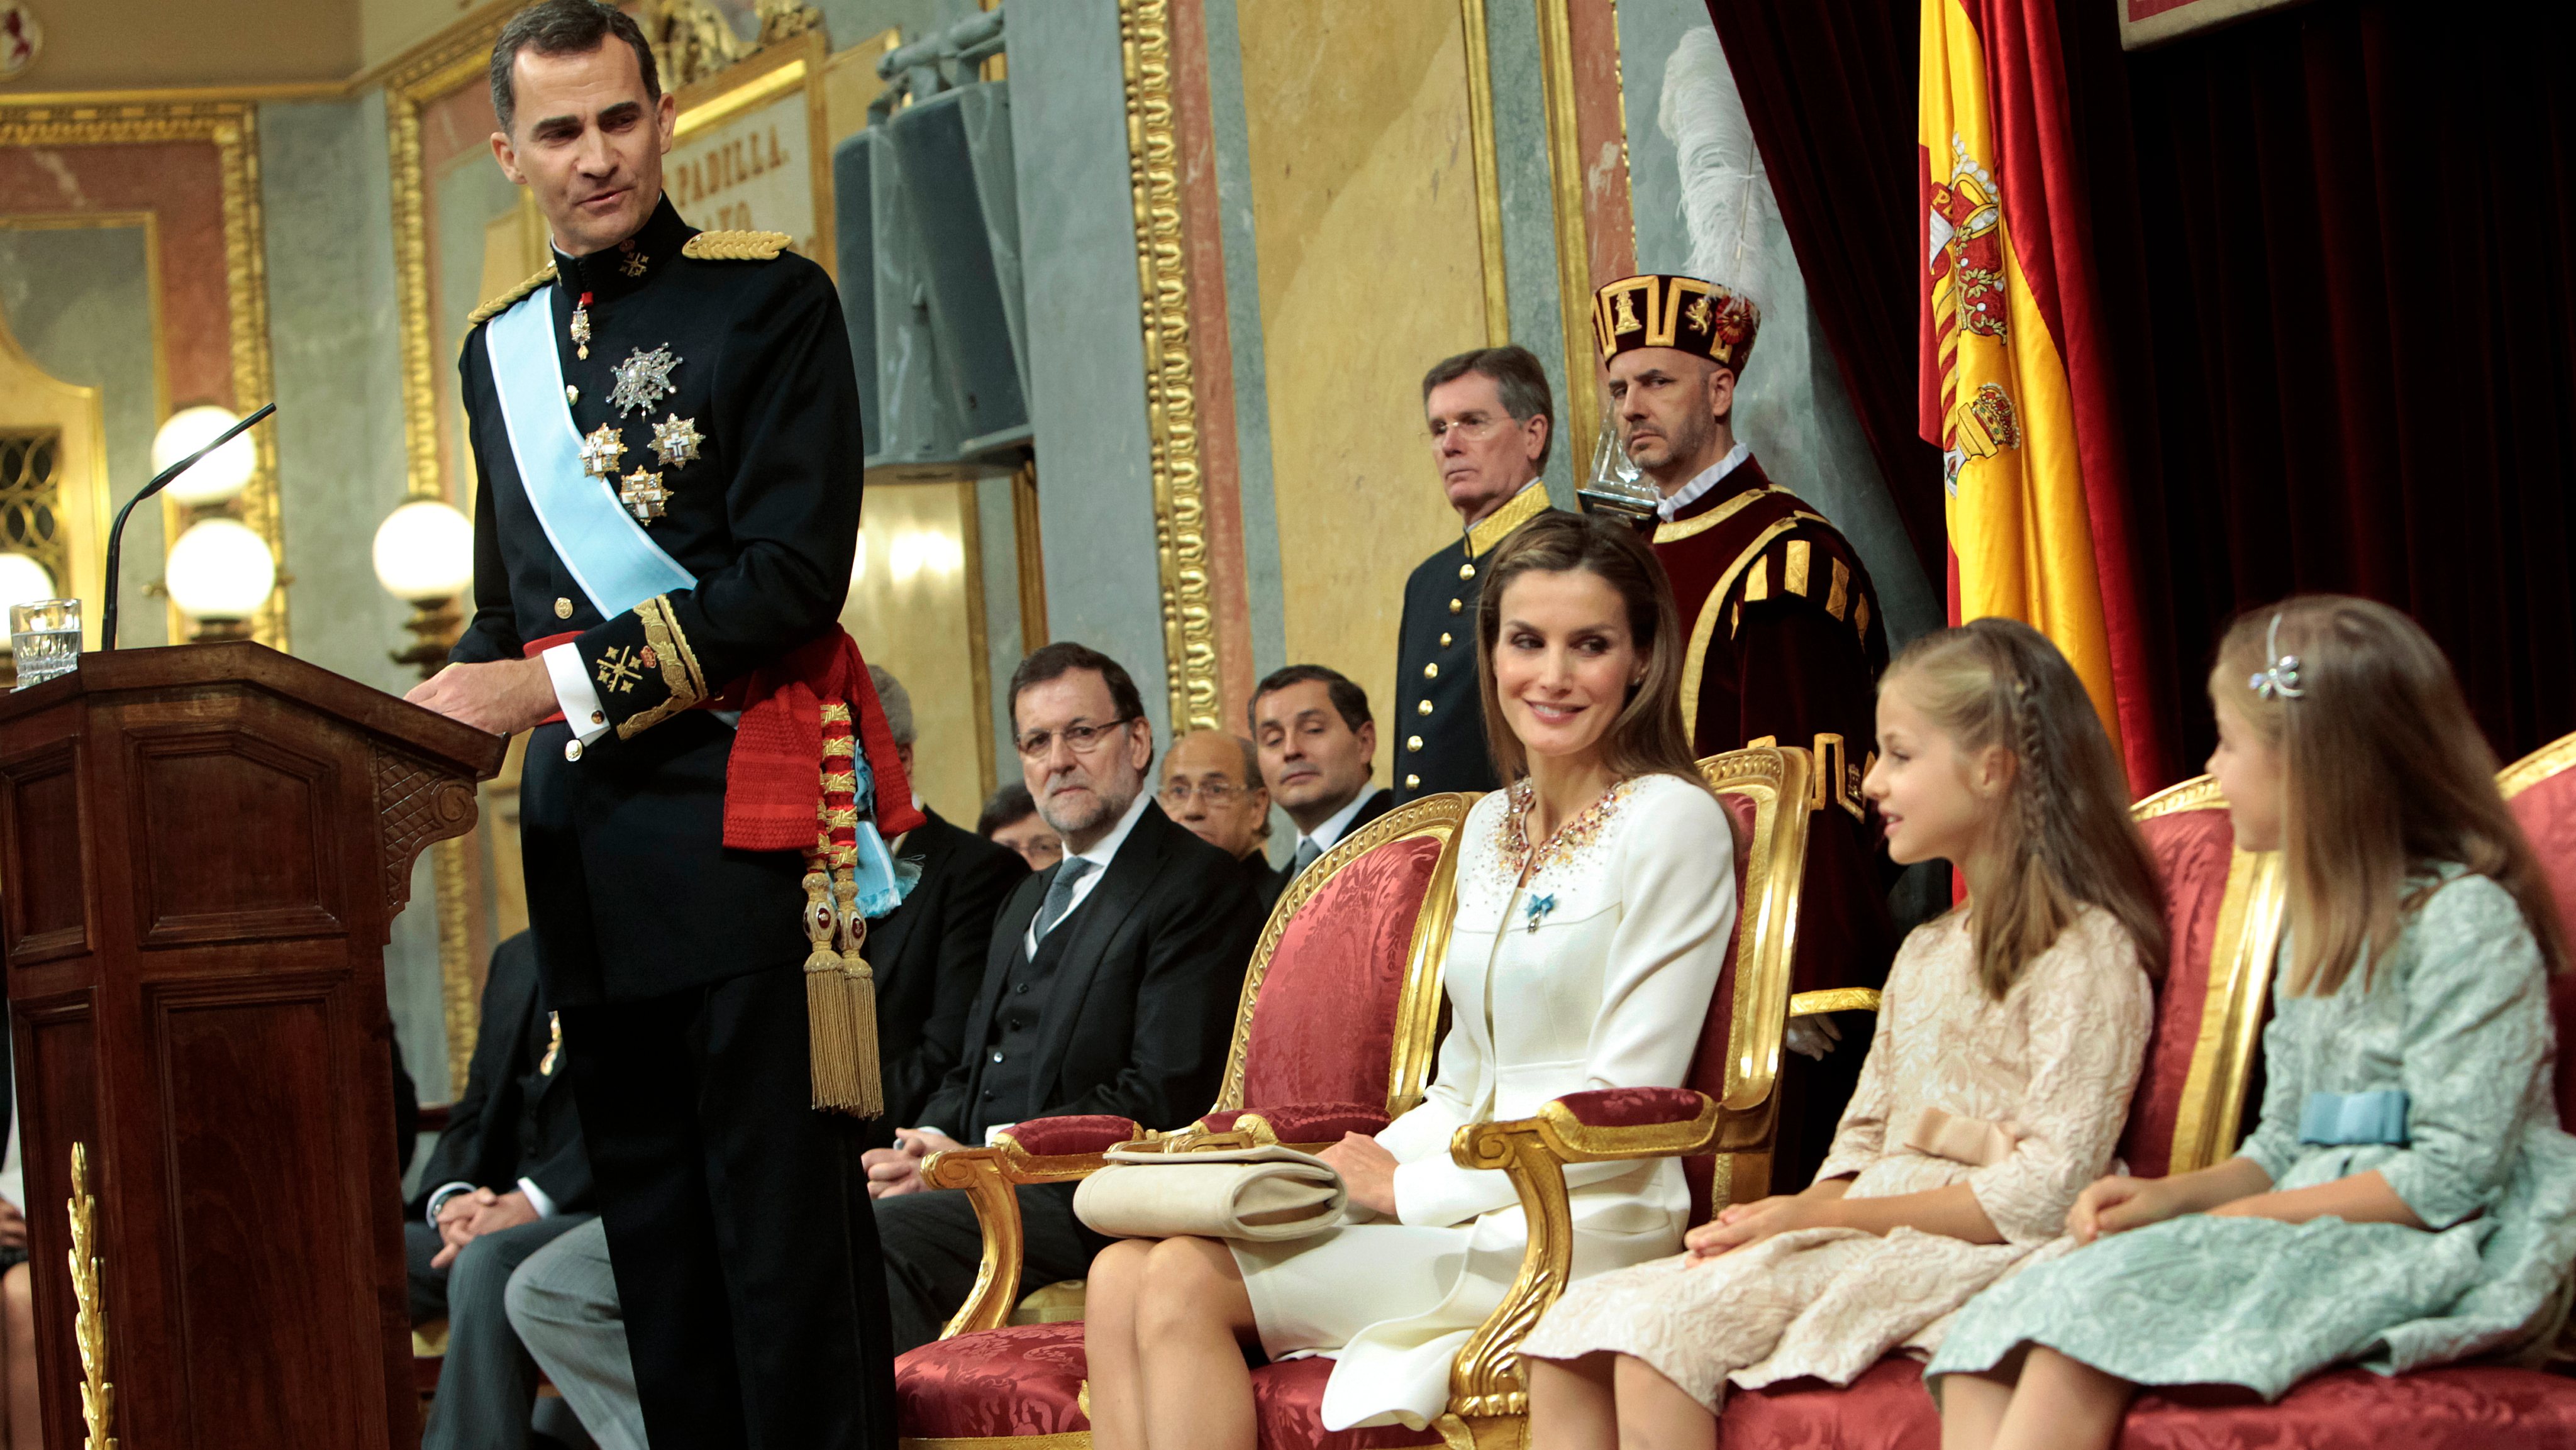 Spain - King Felipe VI at the Spanish Parliament during his Proclamation